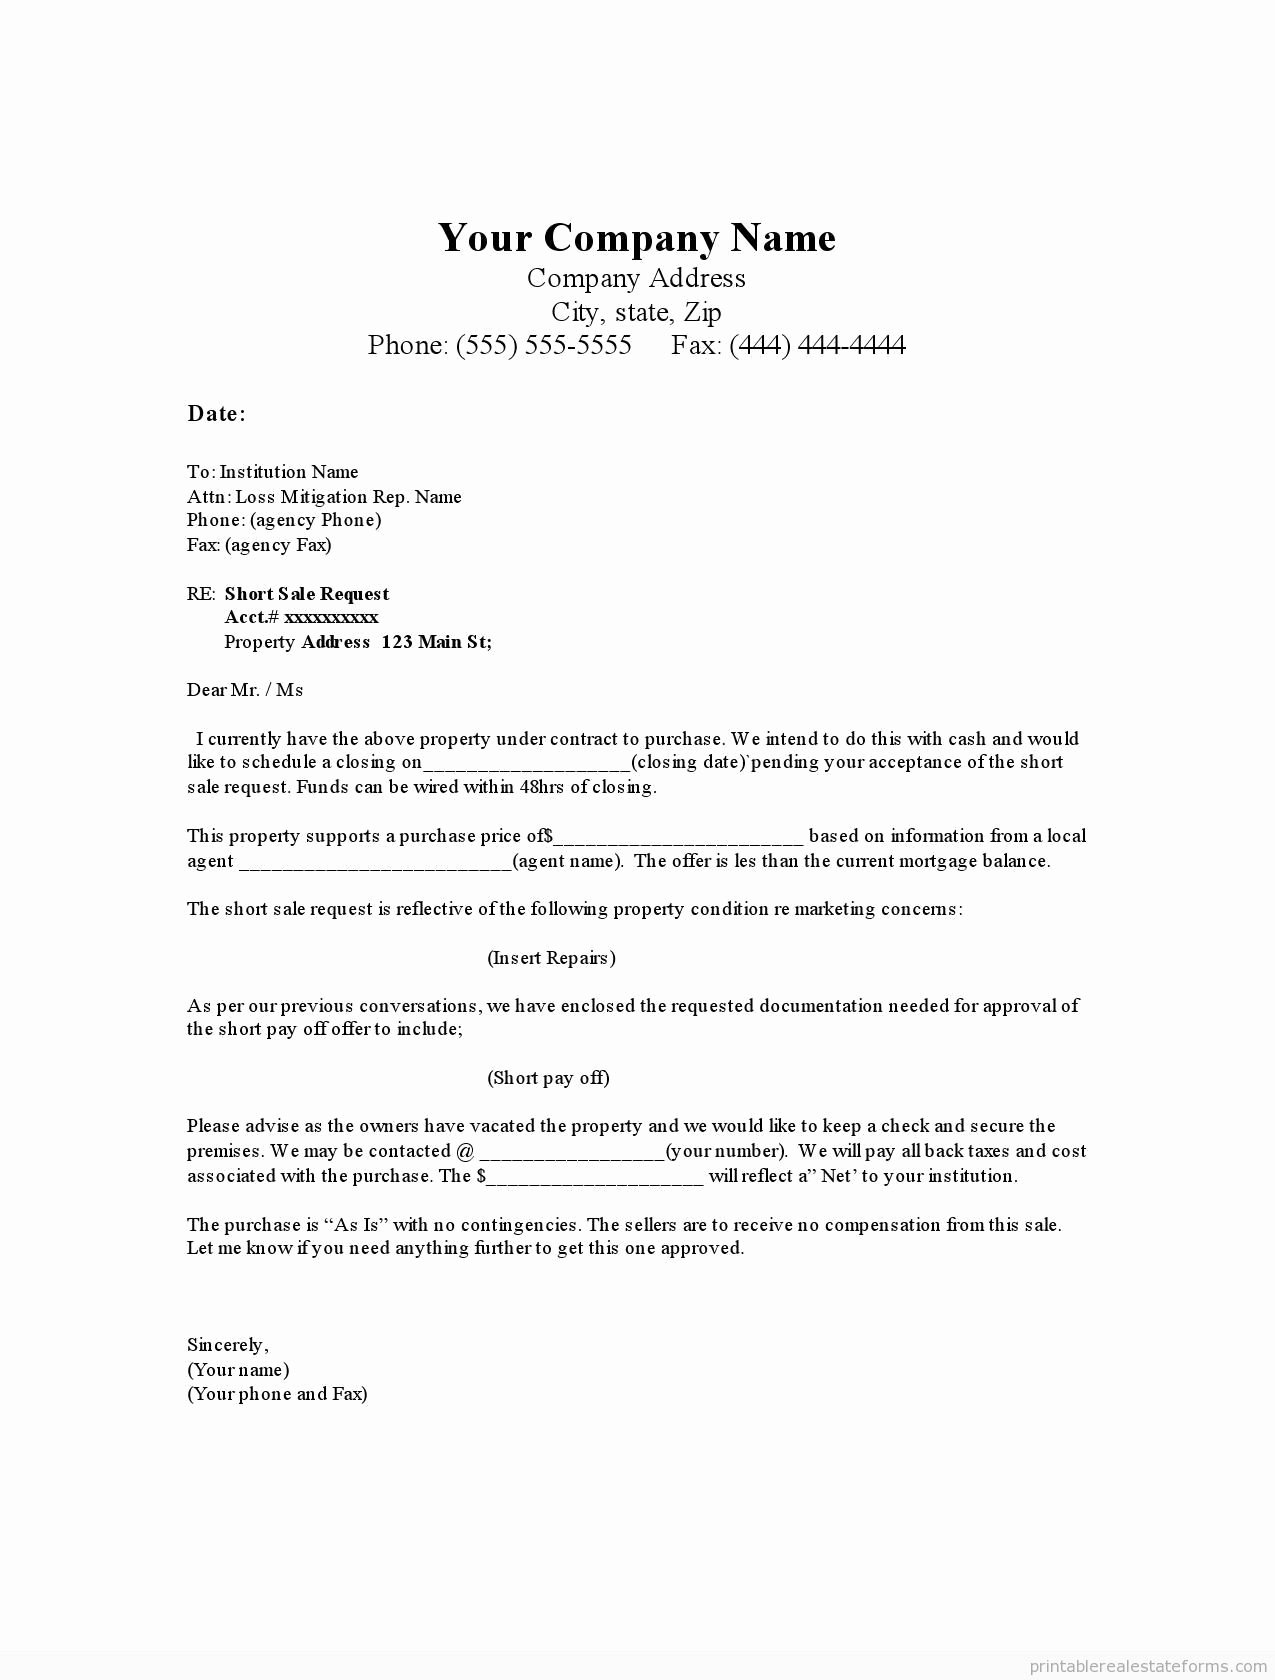 Real Estate Offer Letter Template Awesome Printable Short Offer Letter Good Condition Template 2015